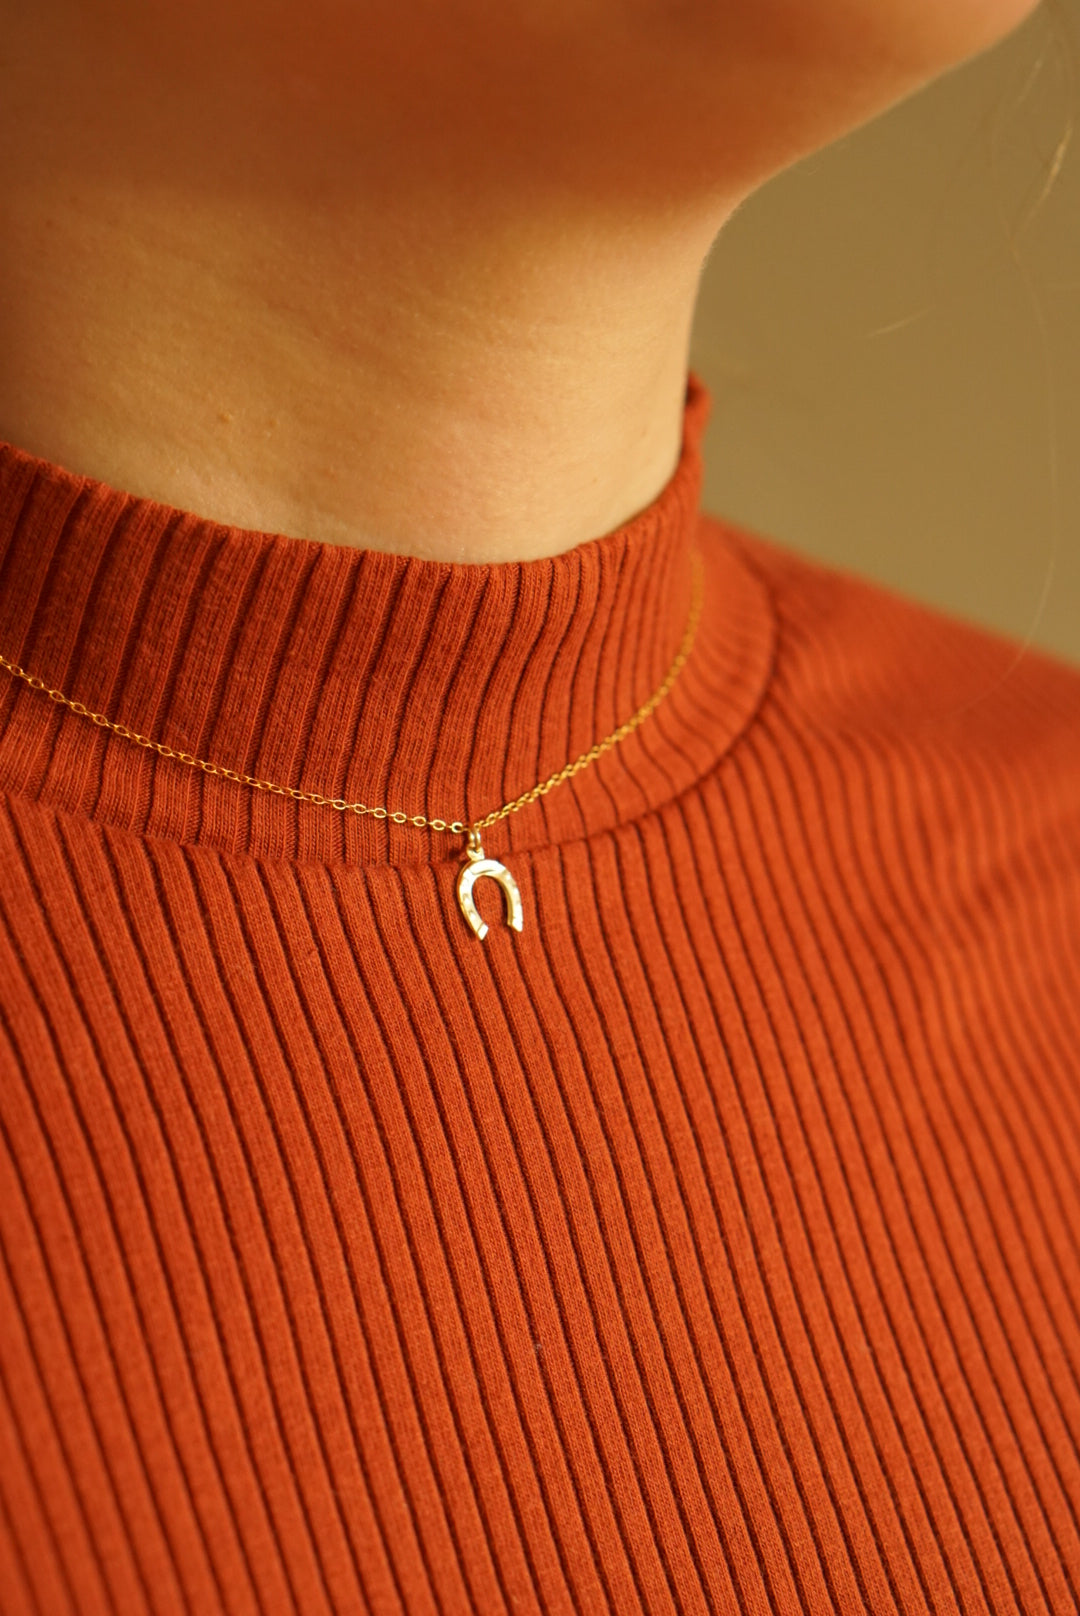 Fine necklace with pendant - Lucky Horseshoe (Winter edition)